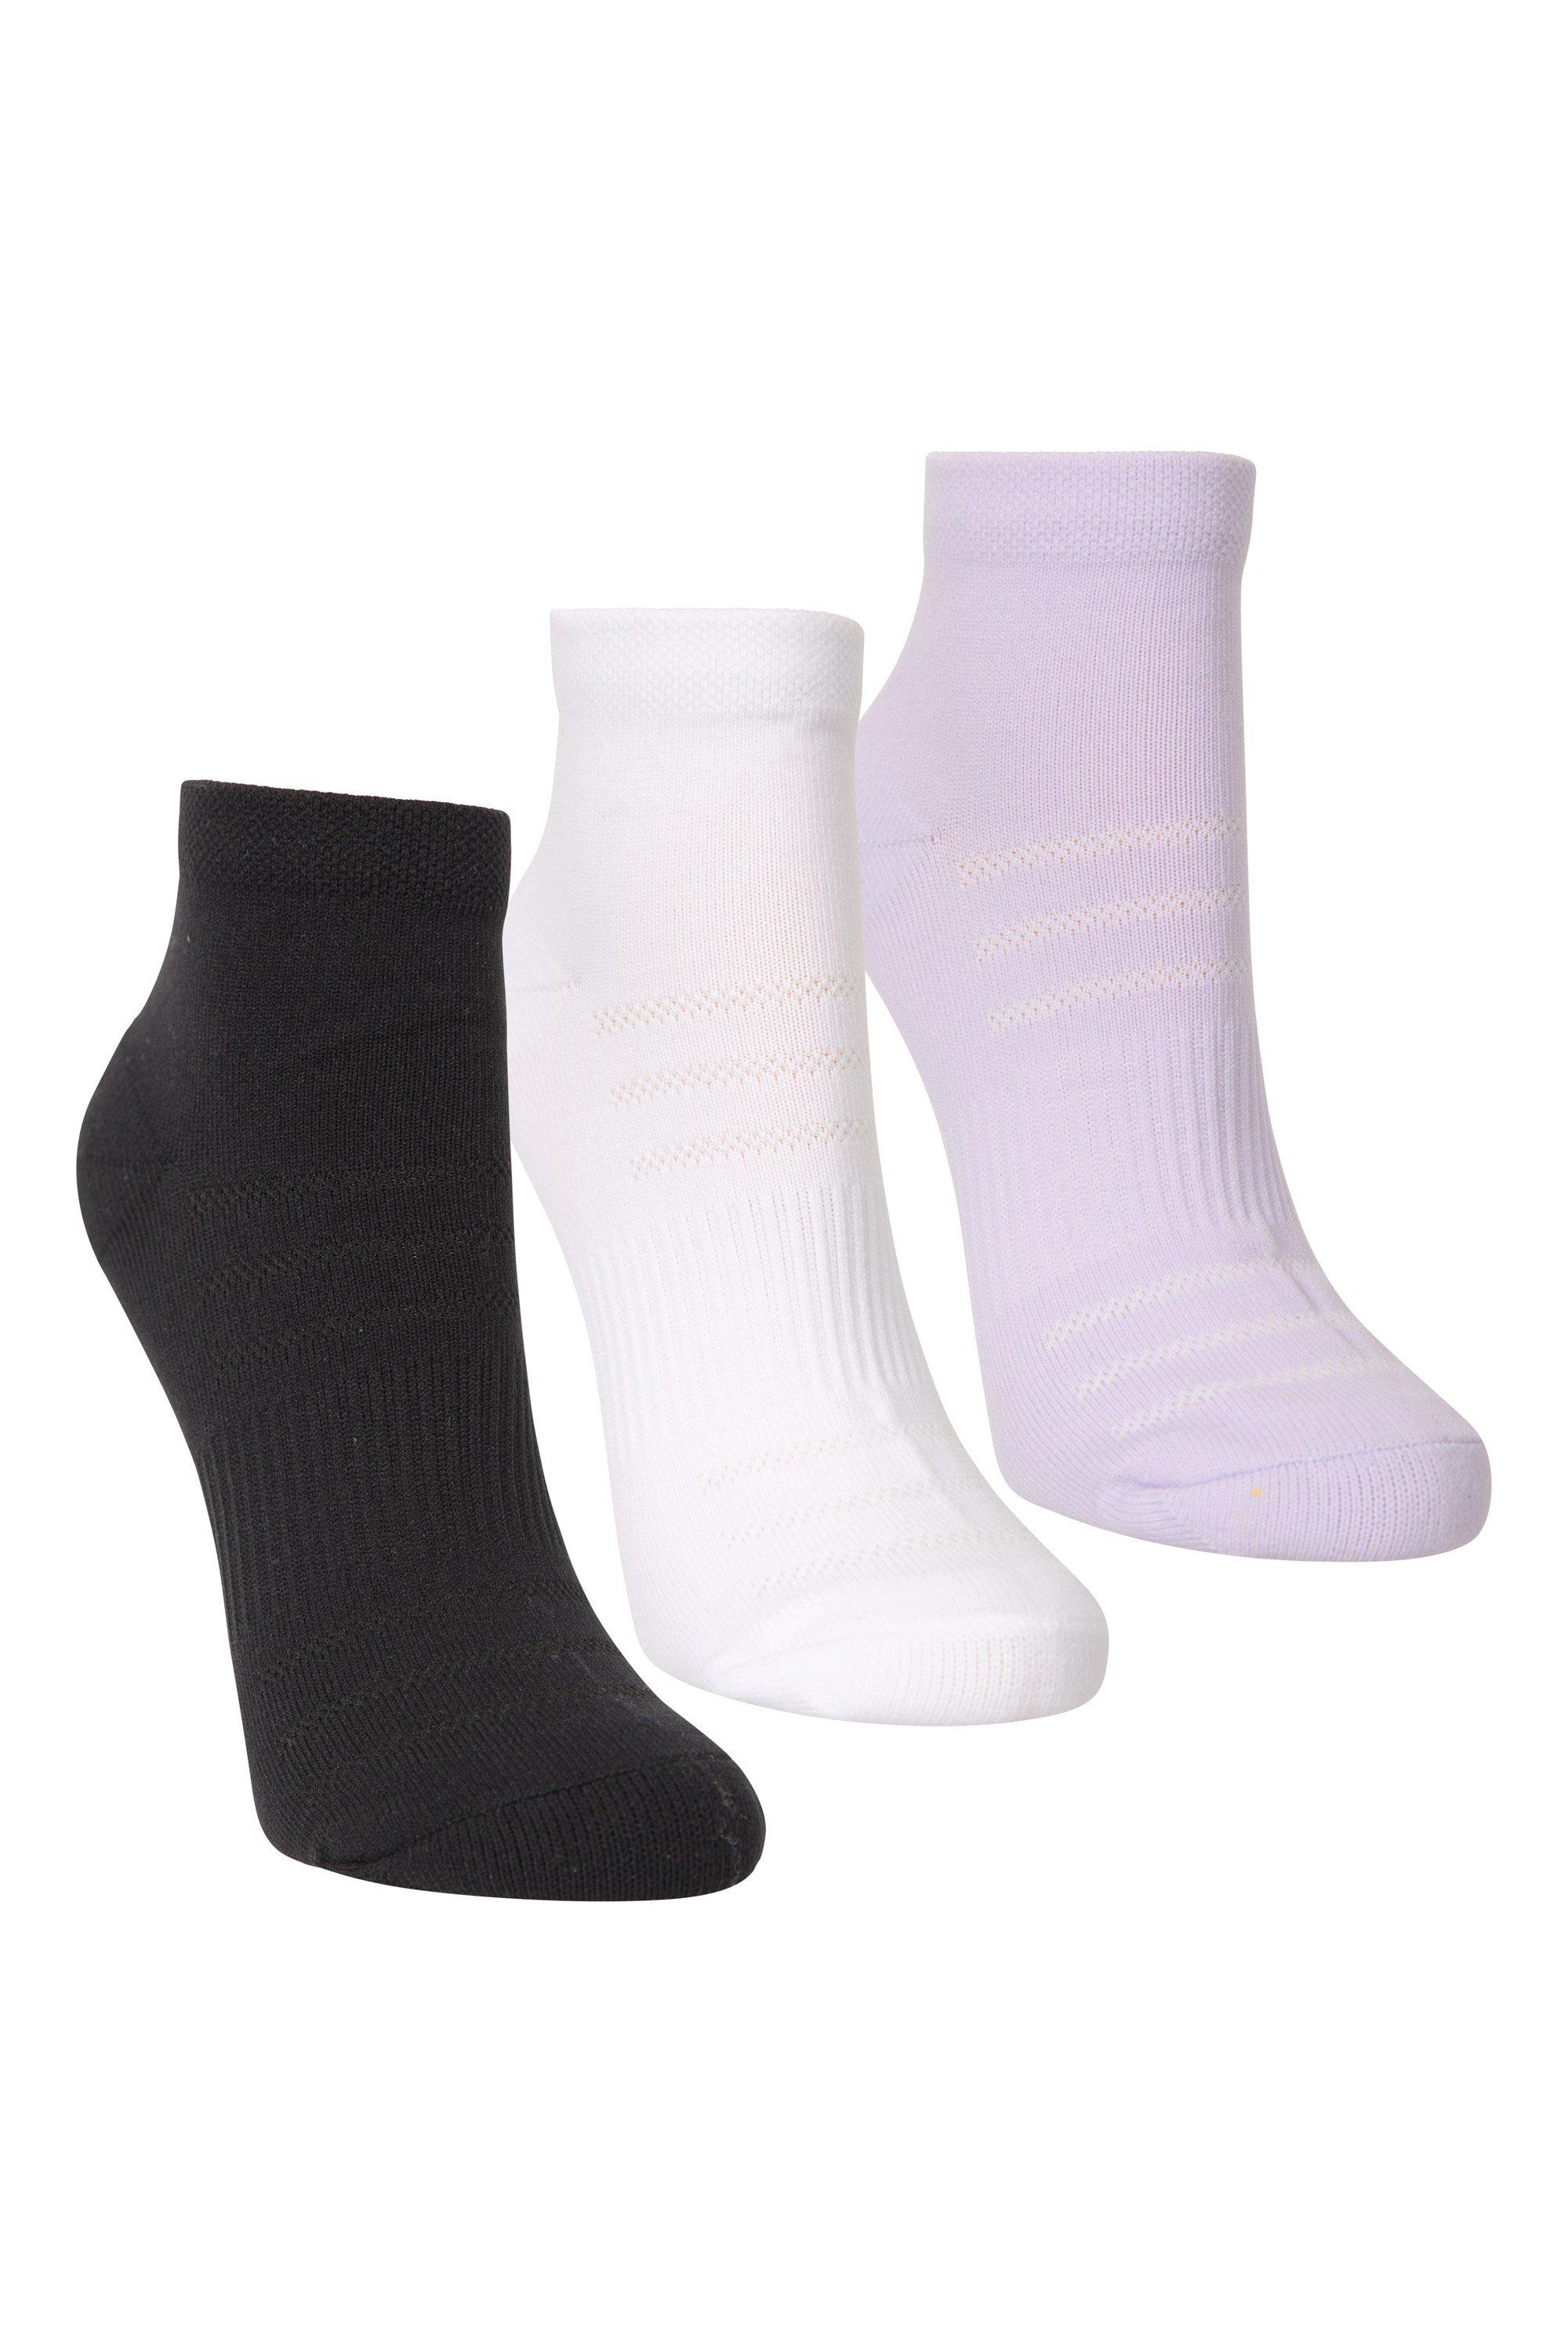 Arch Support Trainer Socks  Ankle Length 3 Packs